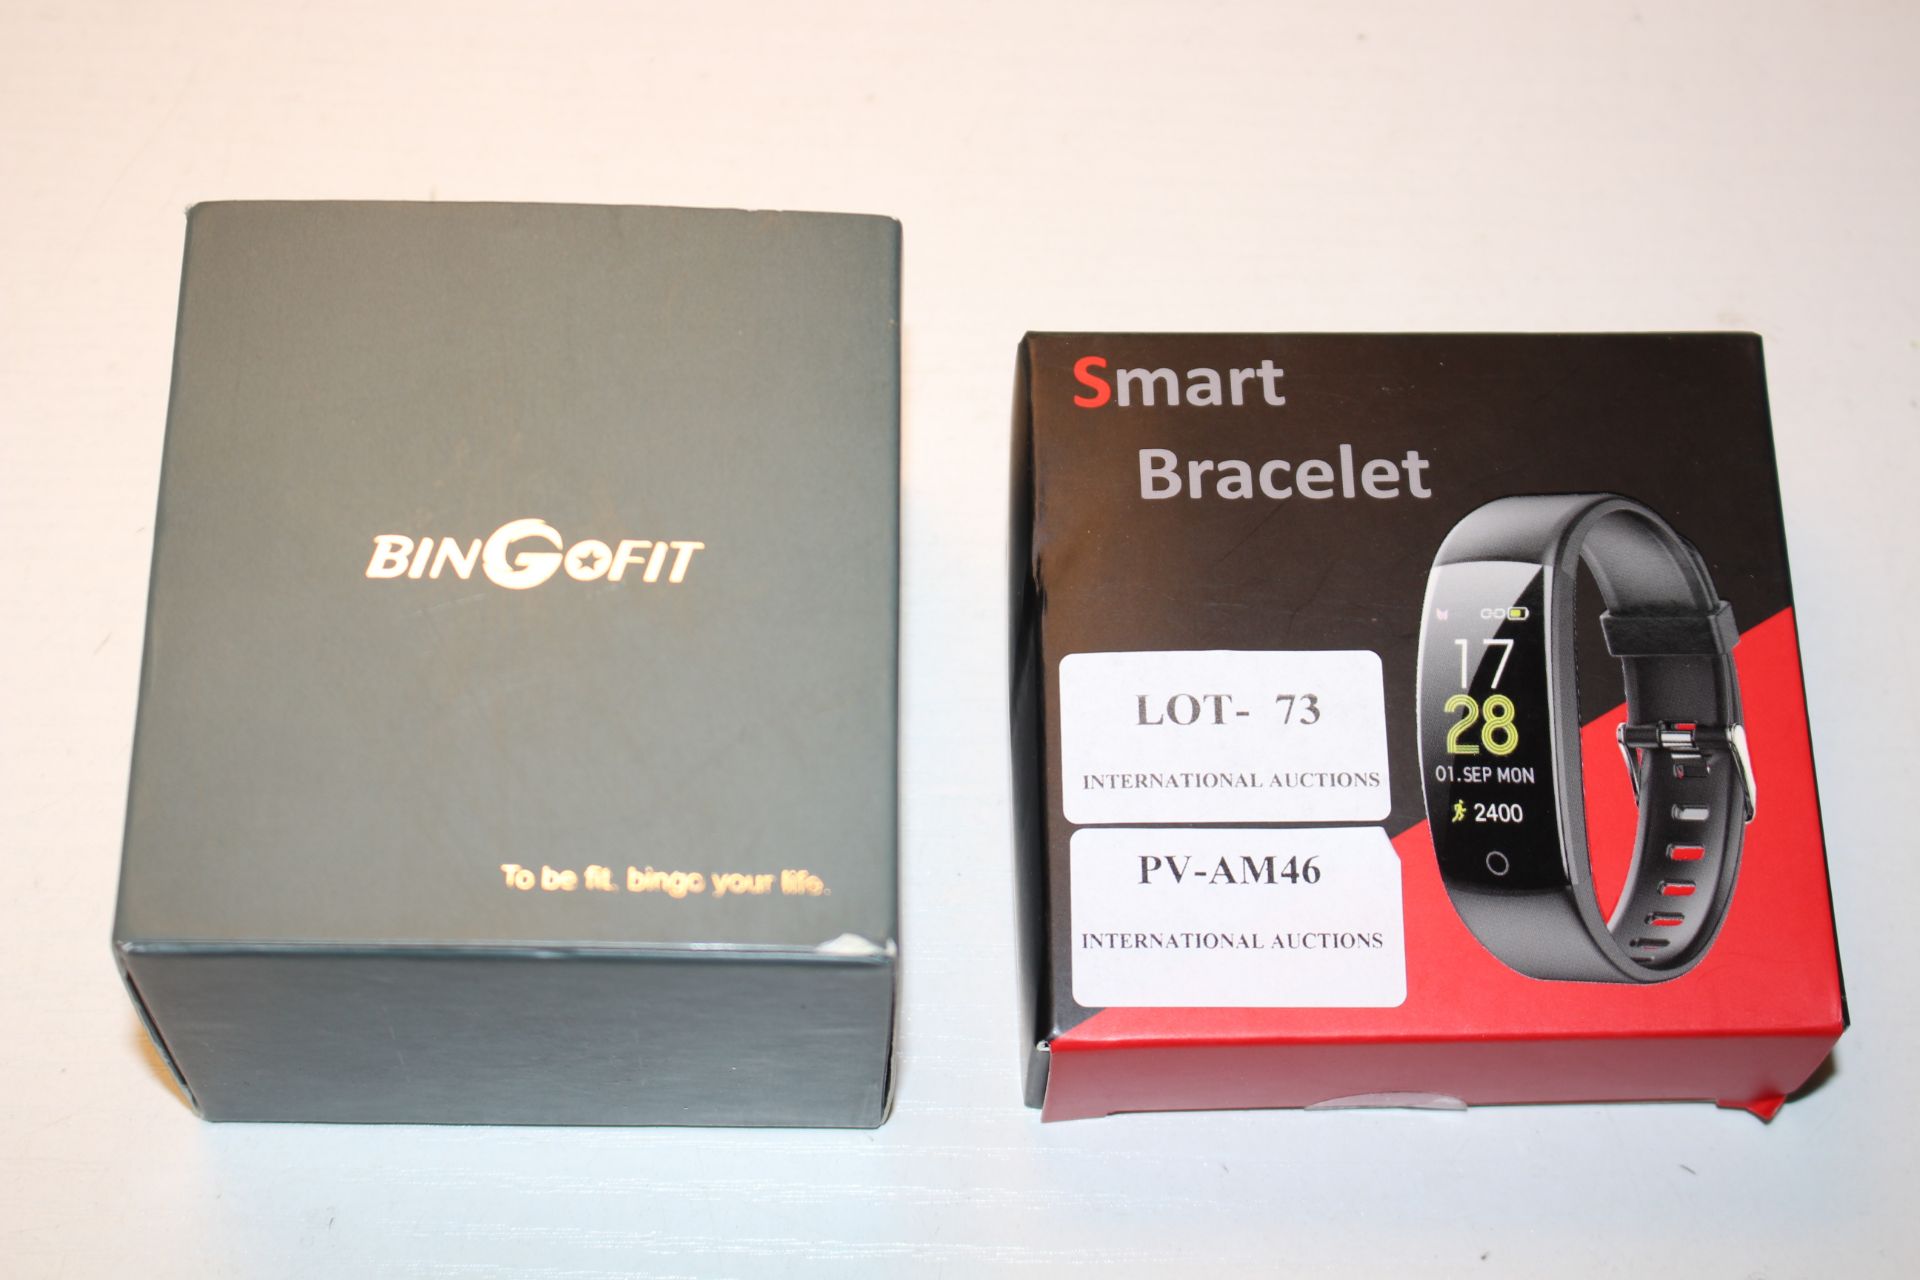 2X BOXED ASSORTED ITEMS TO INCLUDE BINGOFIT & SMART BRACELET (IMAGE DEPICTS STOCK)Condition